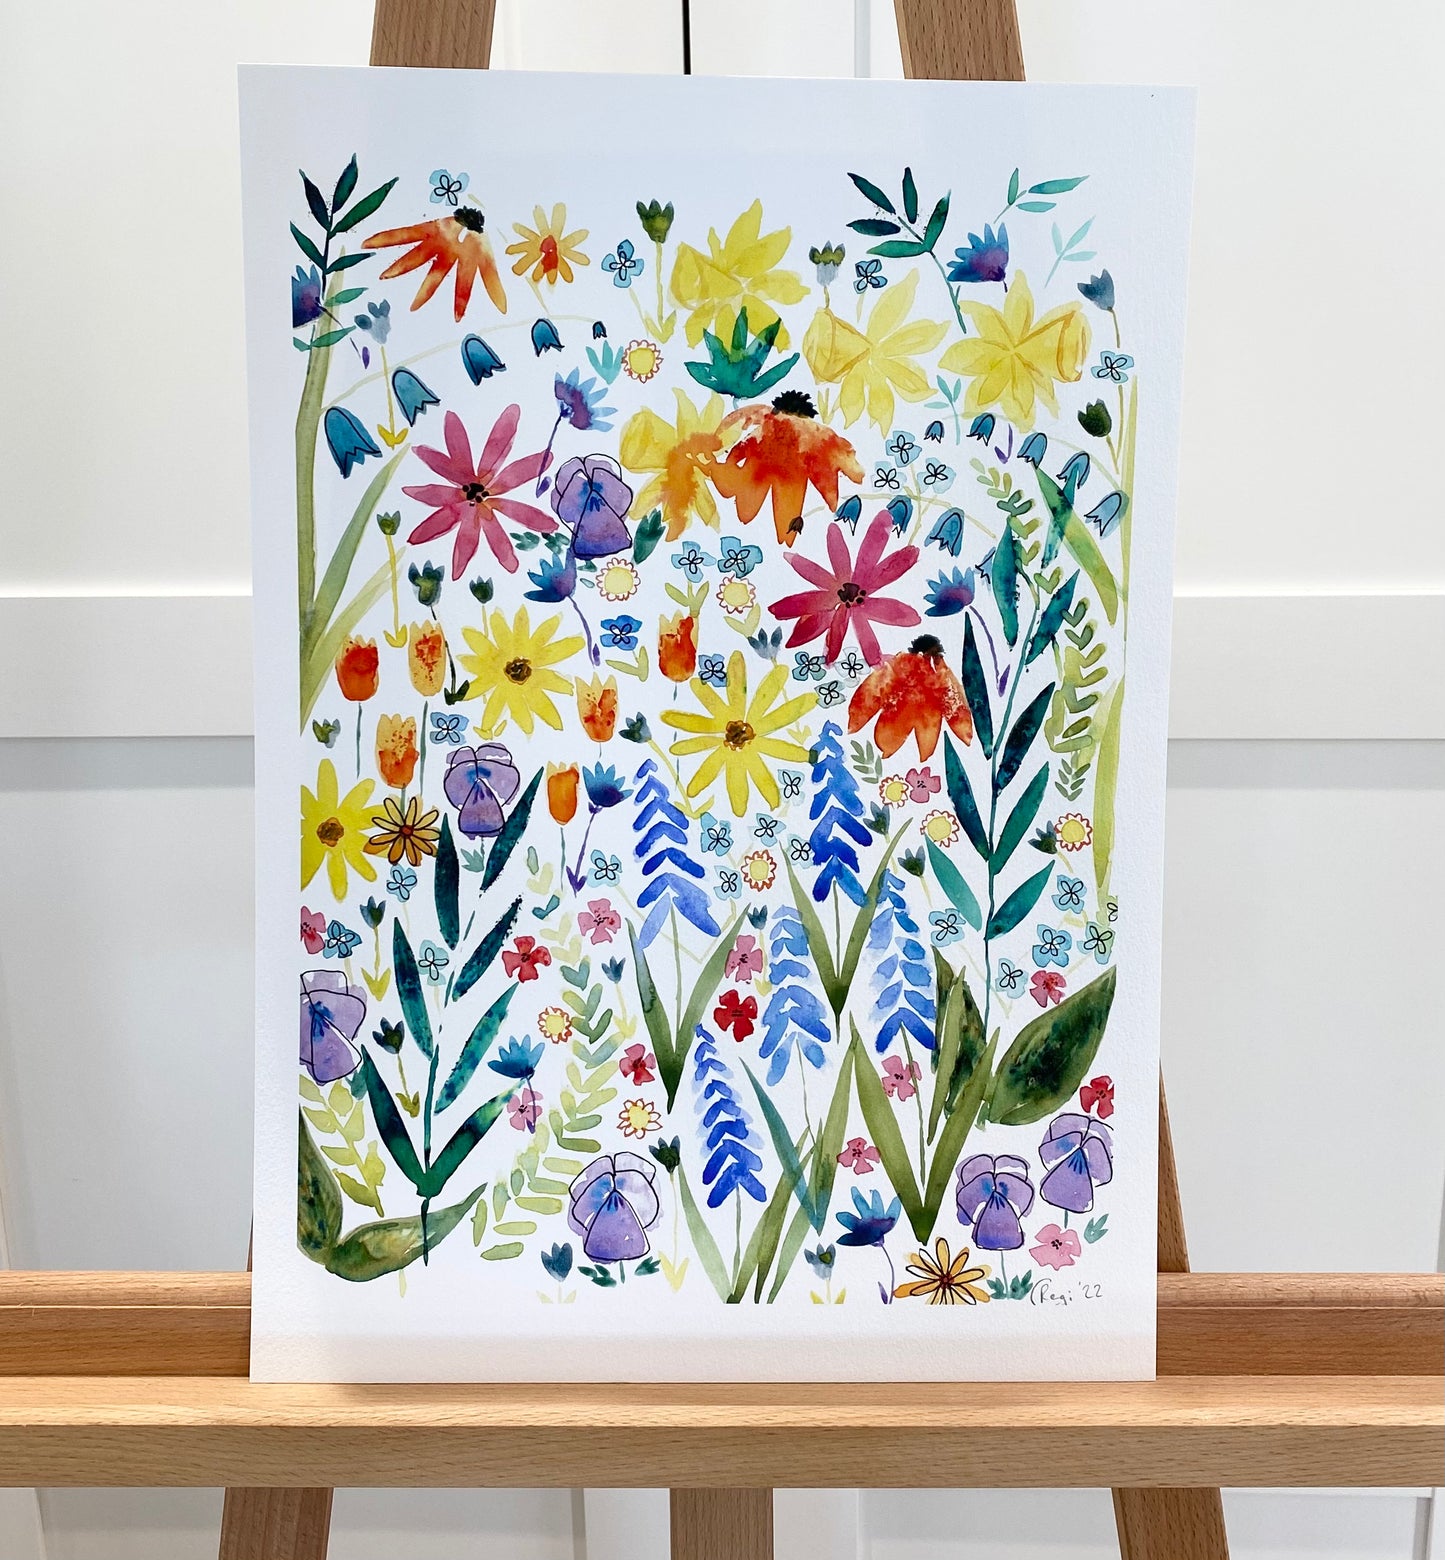 Limited edition A3 Giclee - Hyacinths and Bluebells